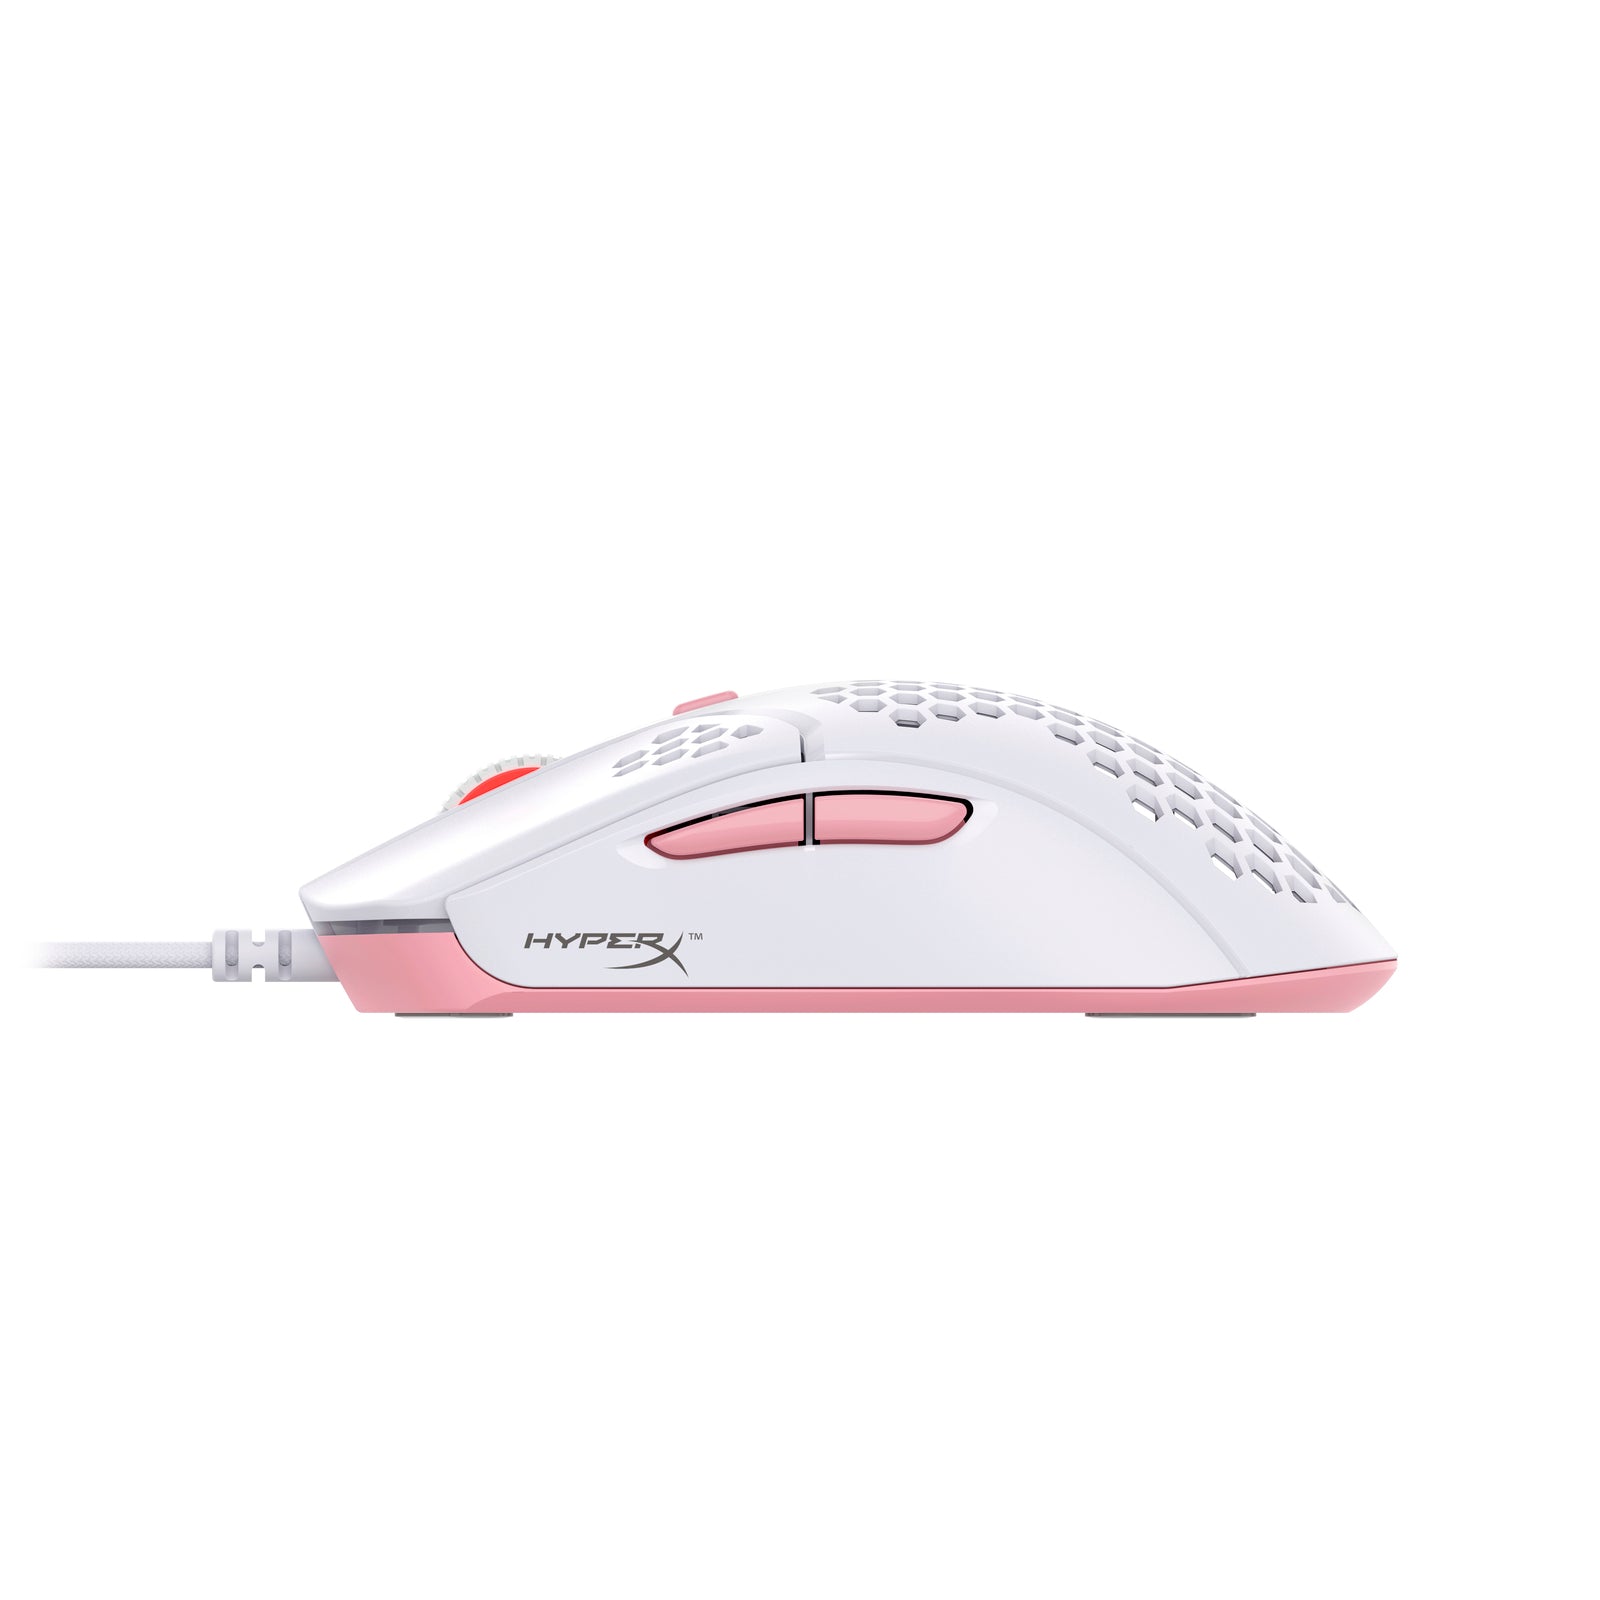 HyperX Pulsefire Haste White-Pink Gaming Mouse Side View